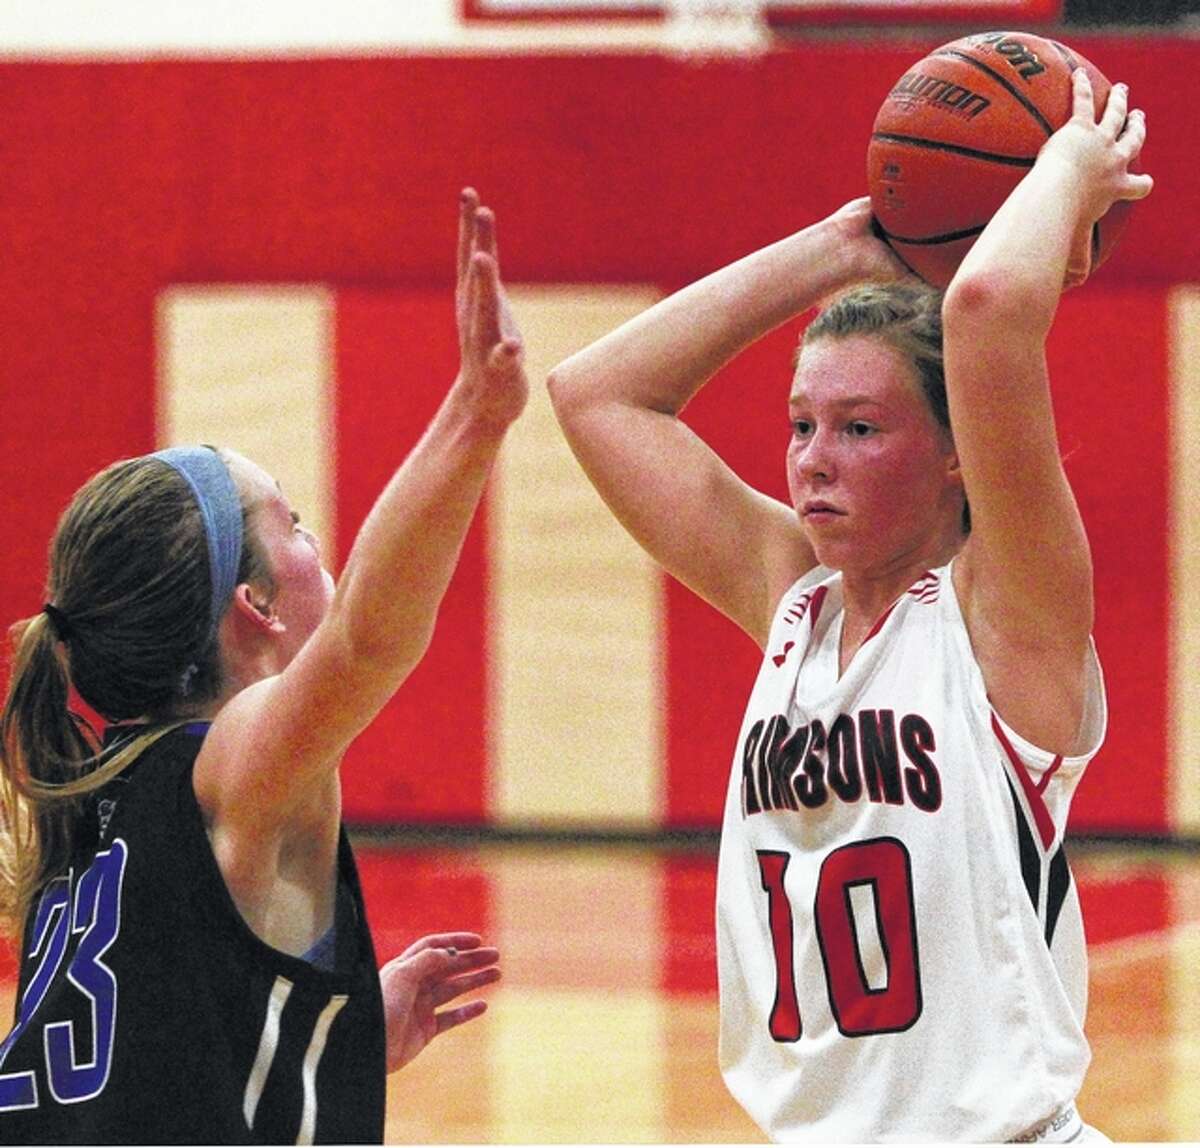 Jacksonville’s Daisy Wood looks for an open teammate during a basketball game against Quincy Tuesday in Jacksonville.